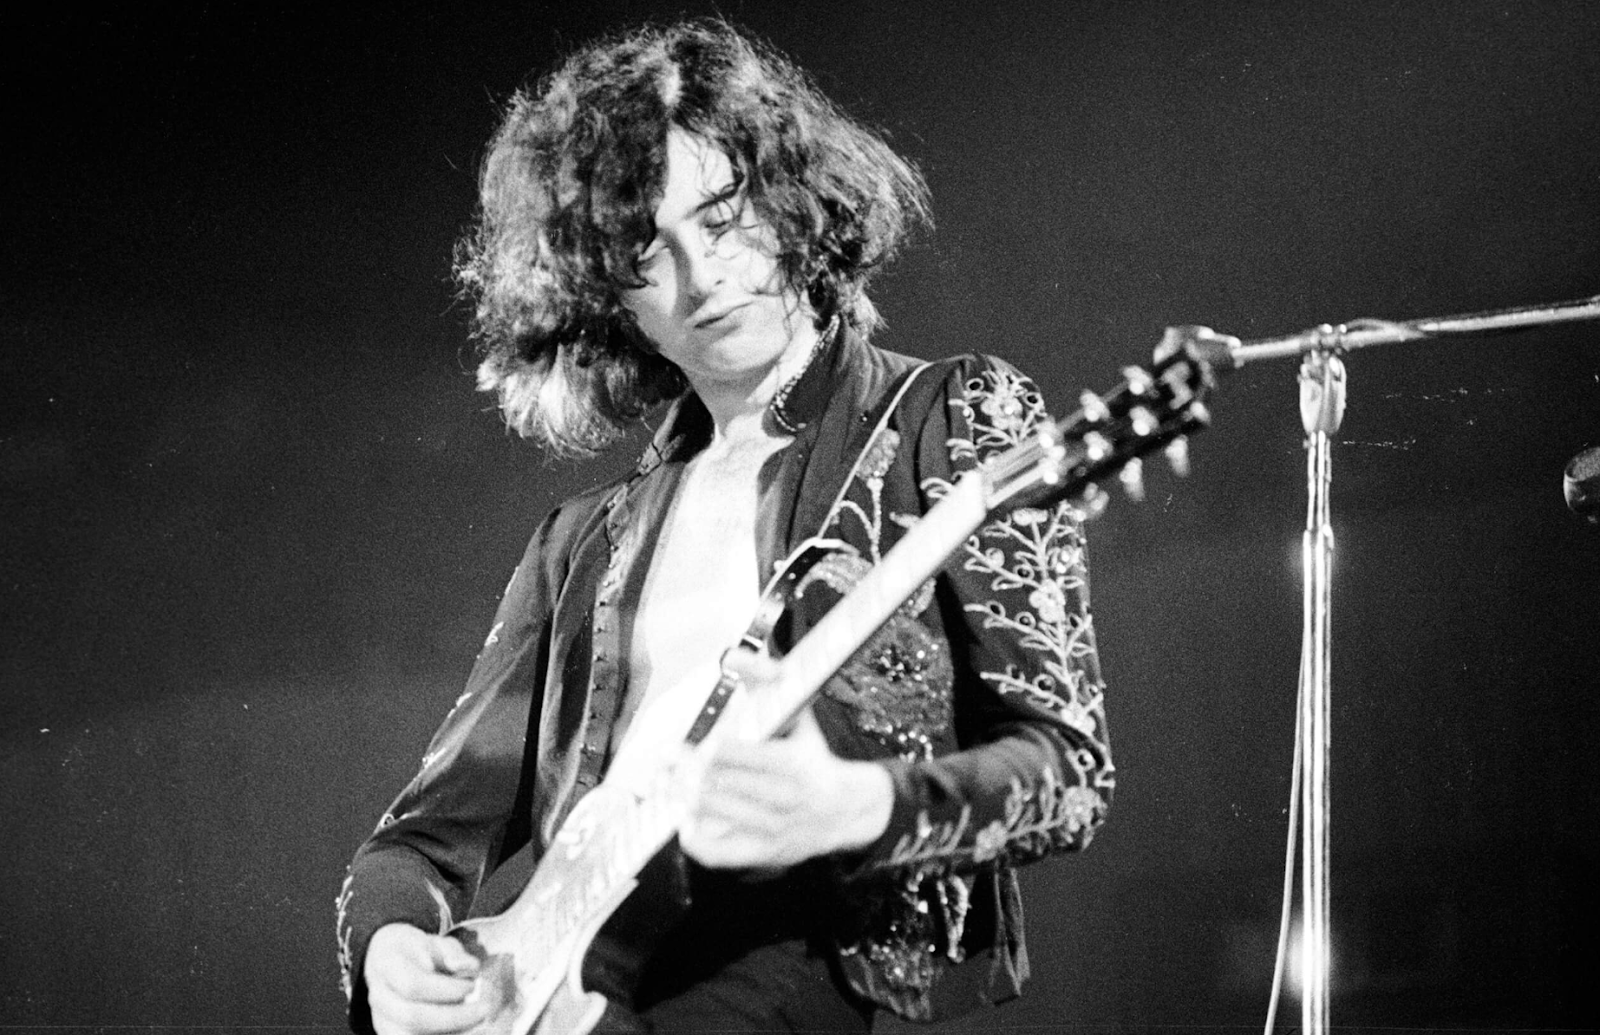  Jimmy Page Best Guitarists of All Time